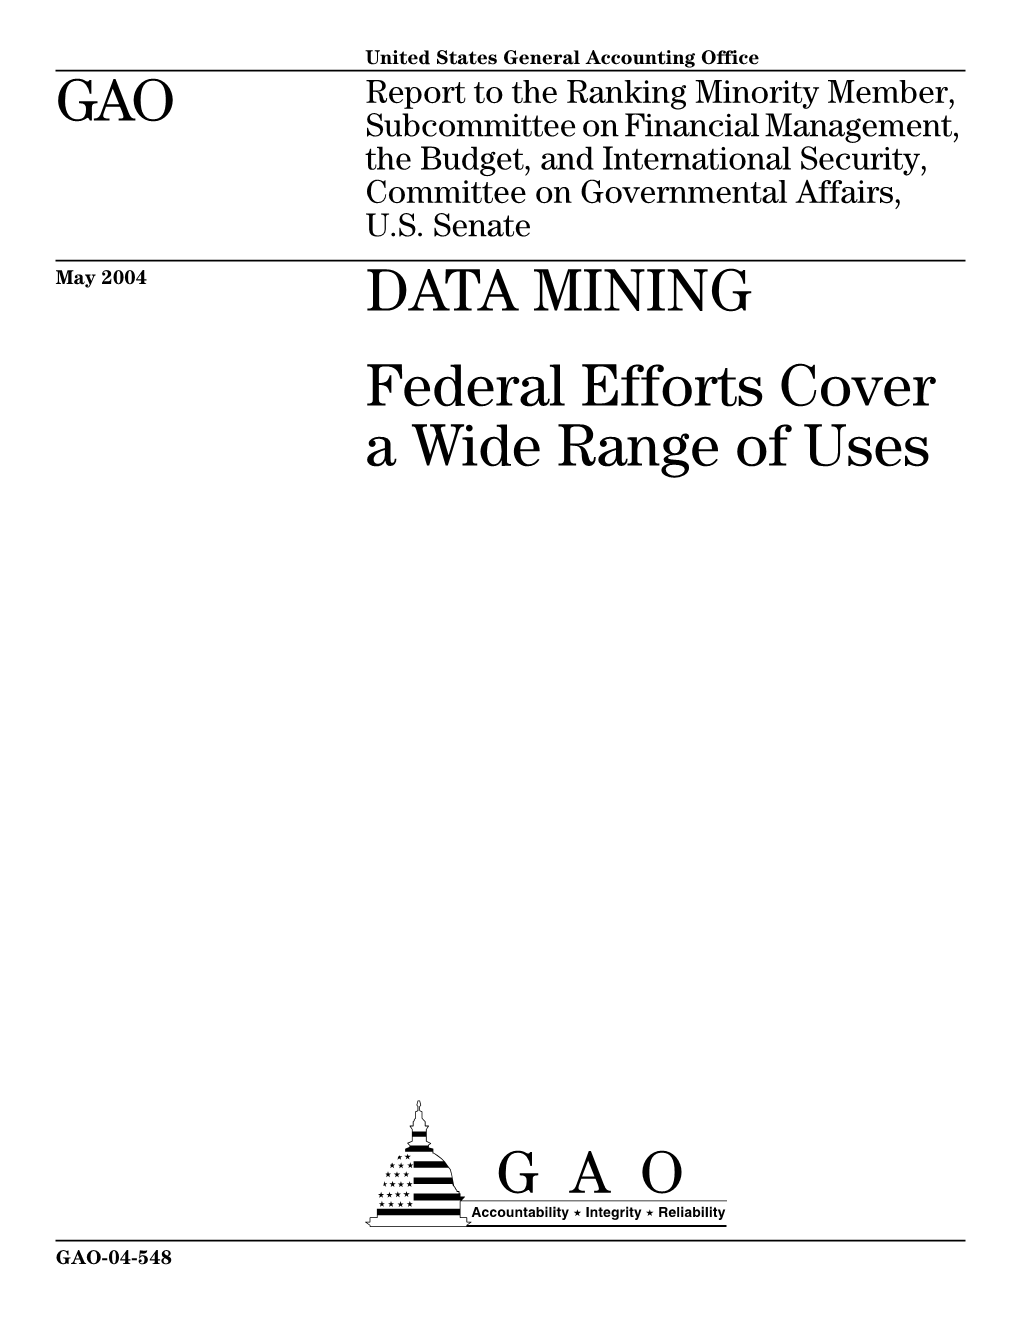 DATA MINING Federal Efforts Cover a Wide Range of Uses